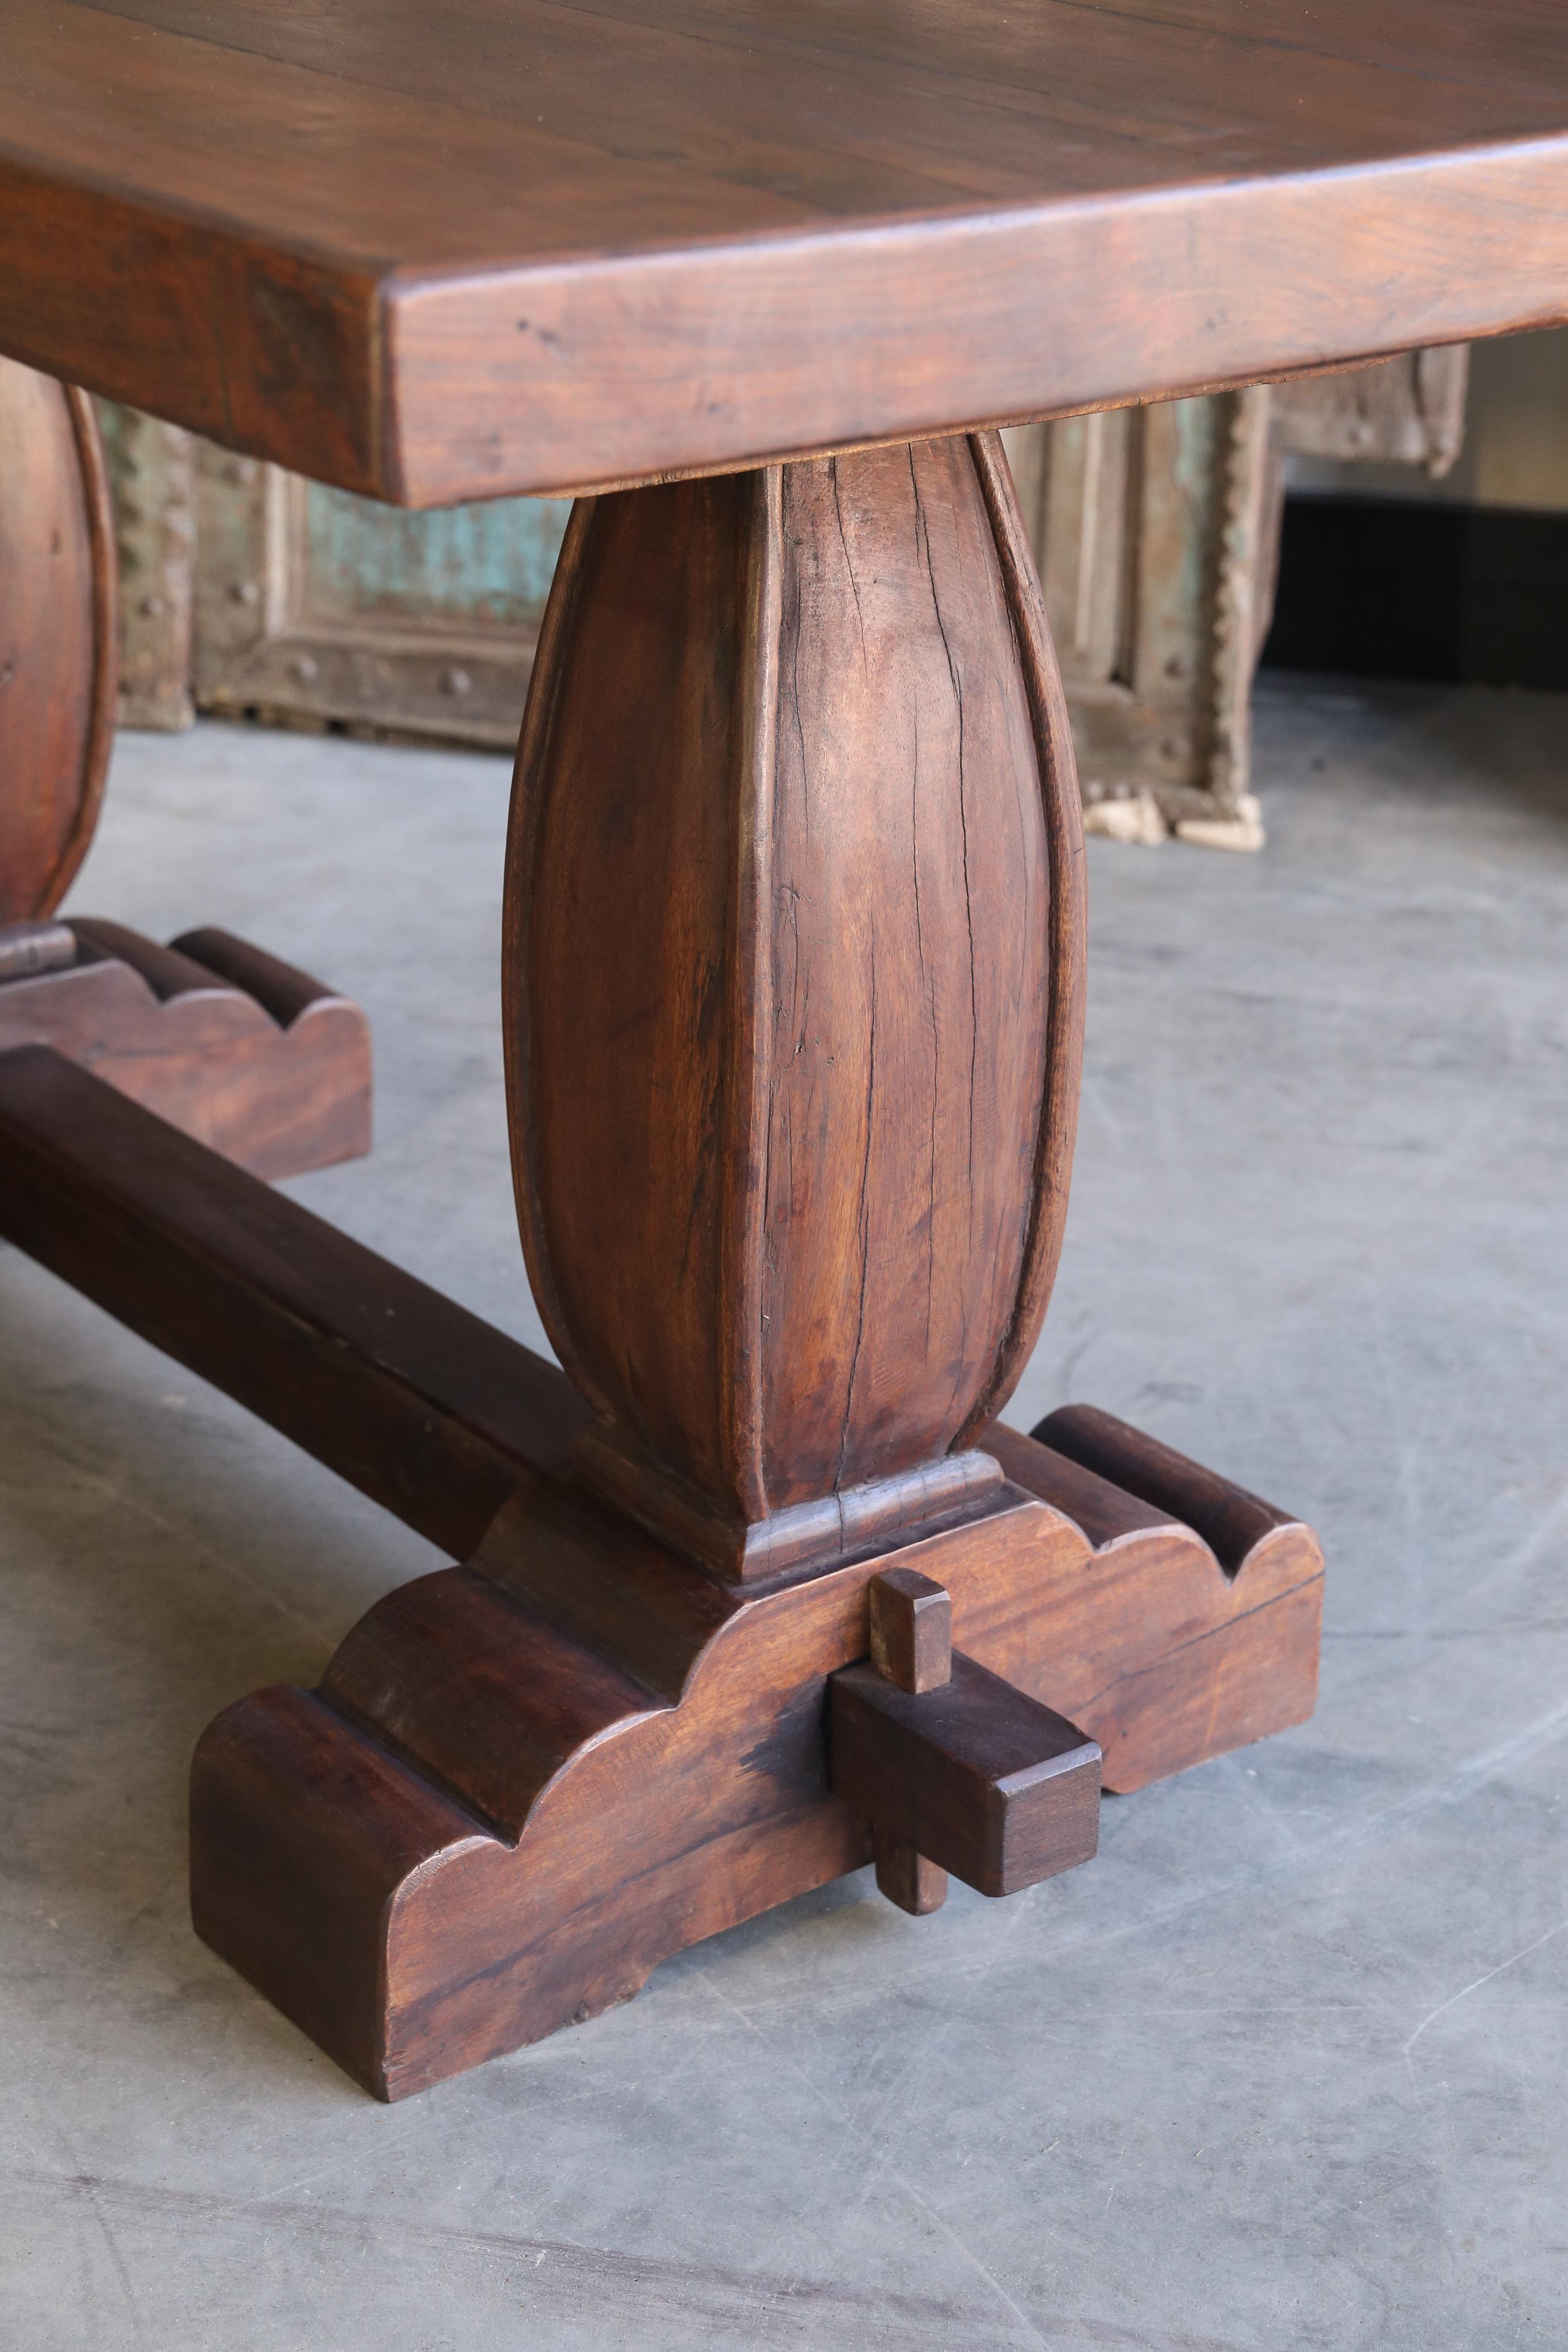 The thick, thick solid teak wood top pedestal table was custom made for a European settler in the Coramandel coast in eastern India. This was made when teak wood was plentiful and the craftsmen had time to create a classic furniture. This elegant